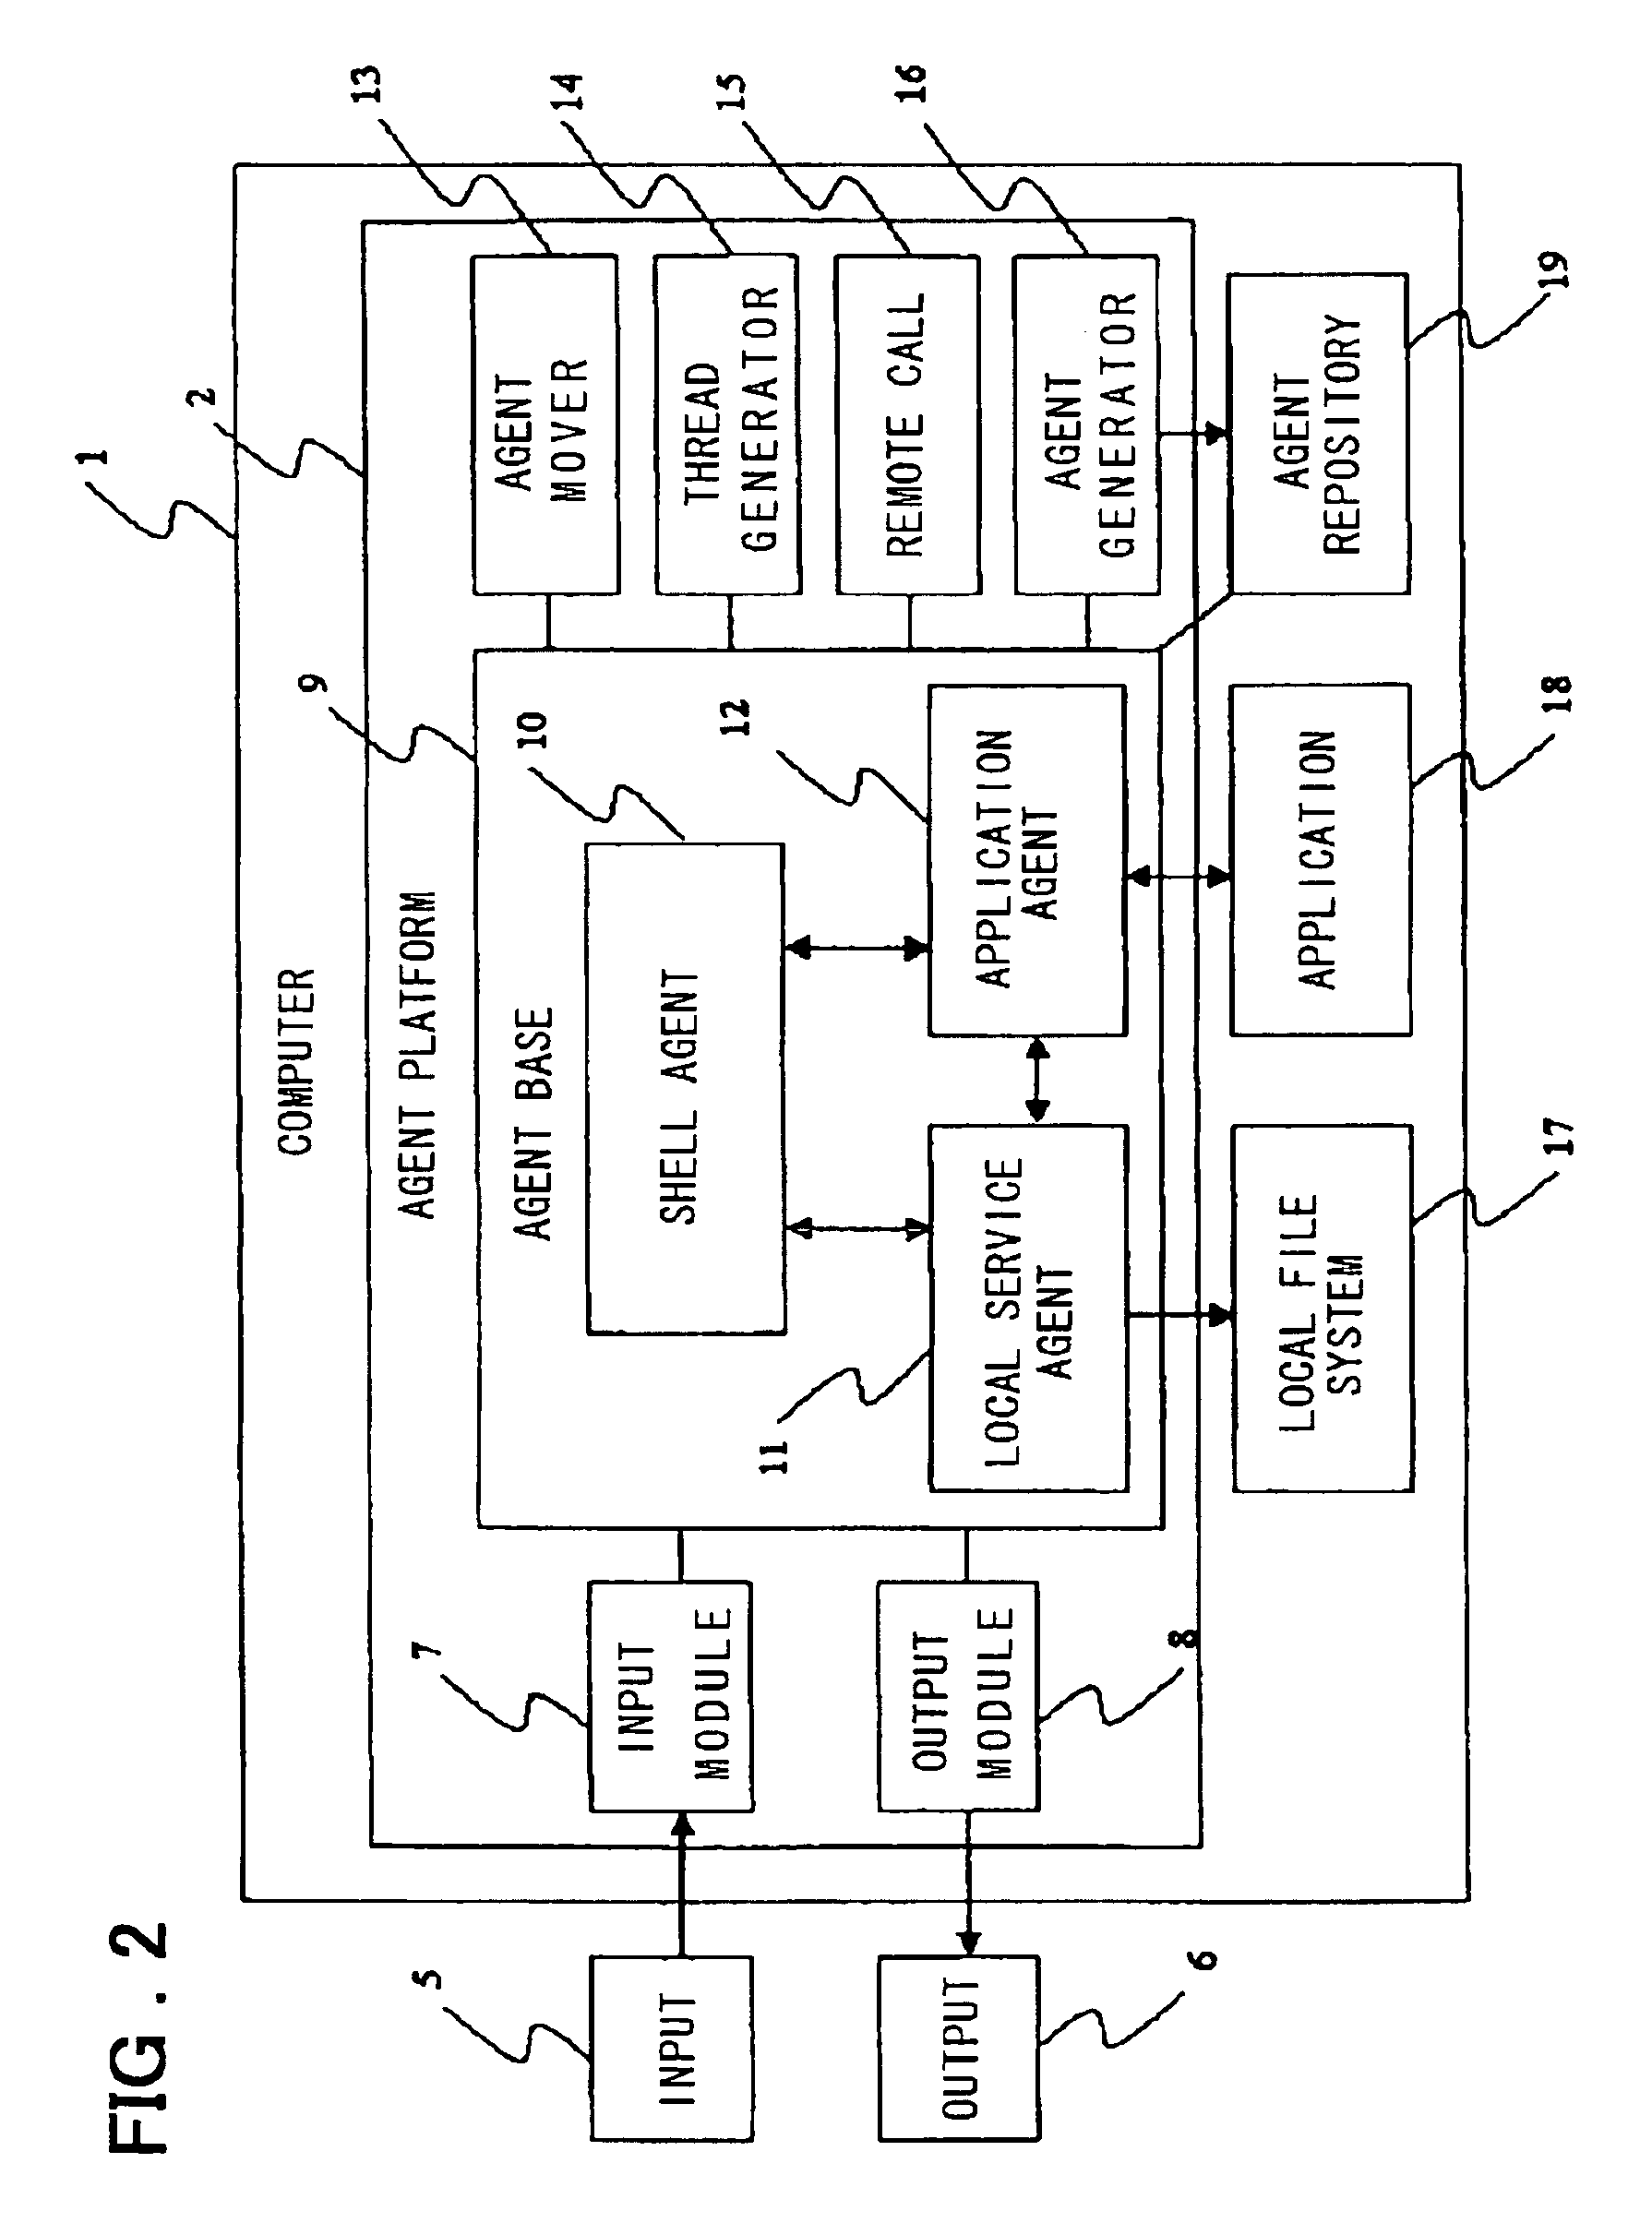 Distributed application control system, control method and a program